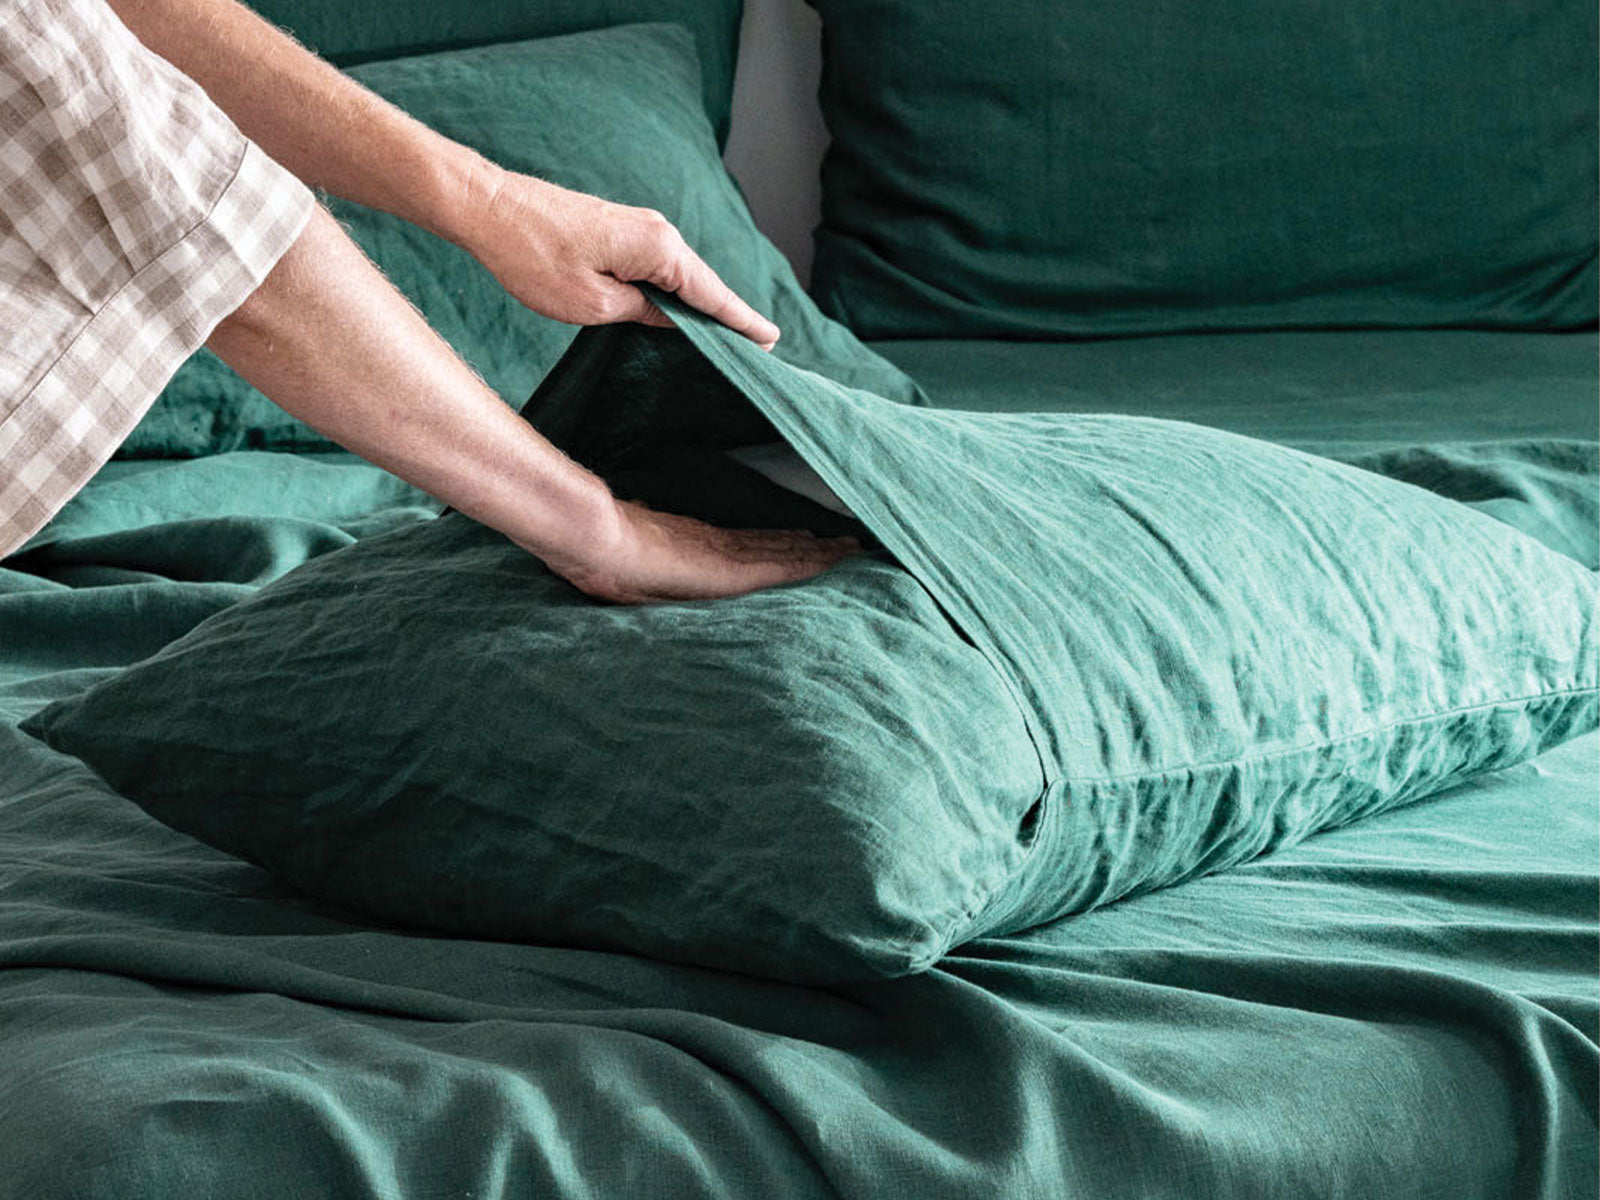 With us, making your bed is easy